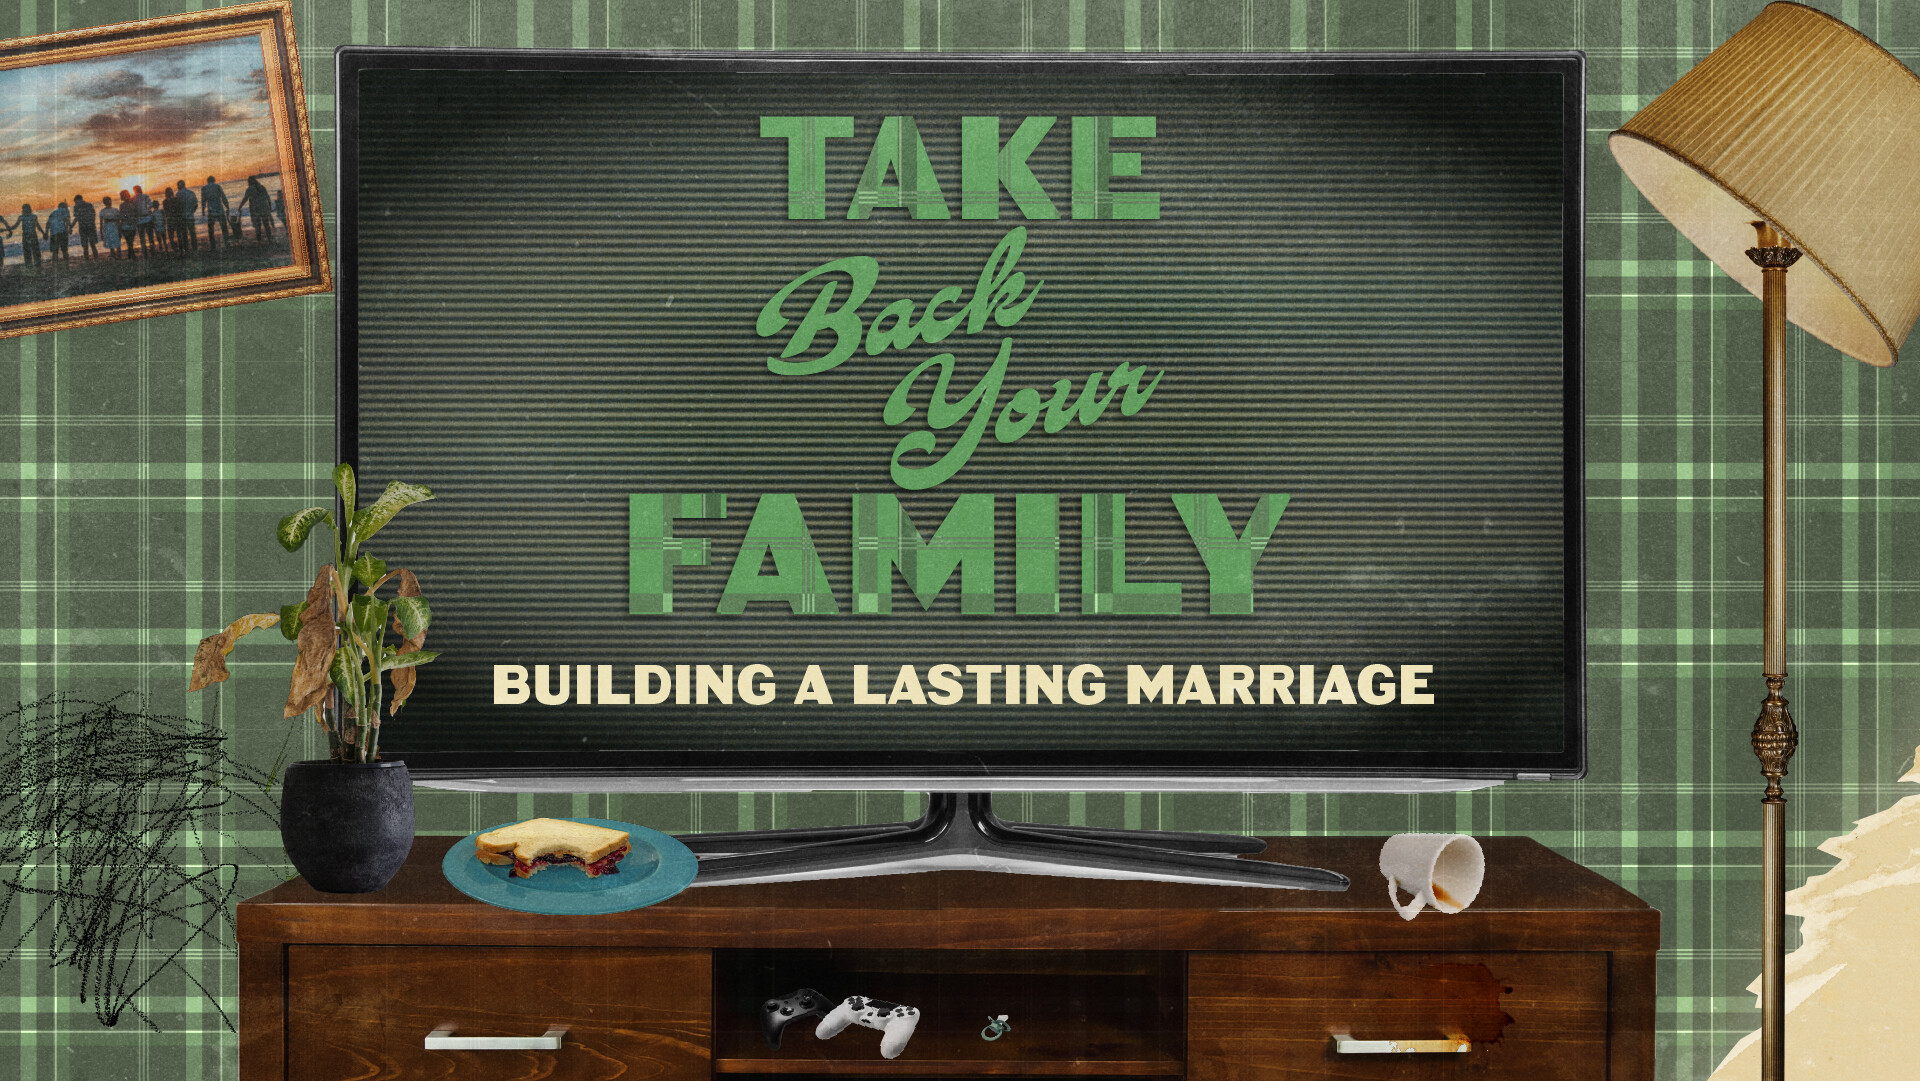 Building a Lasting Marriage